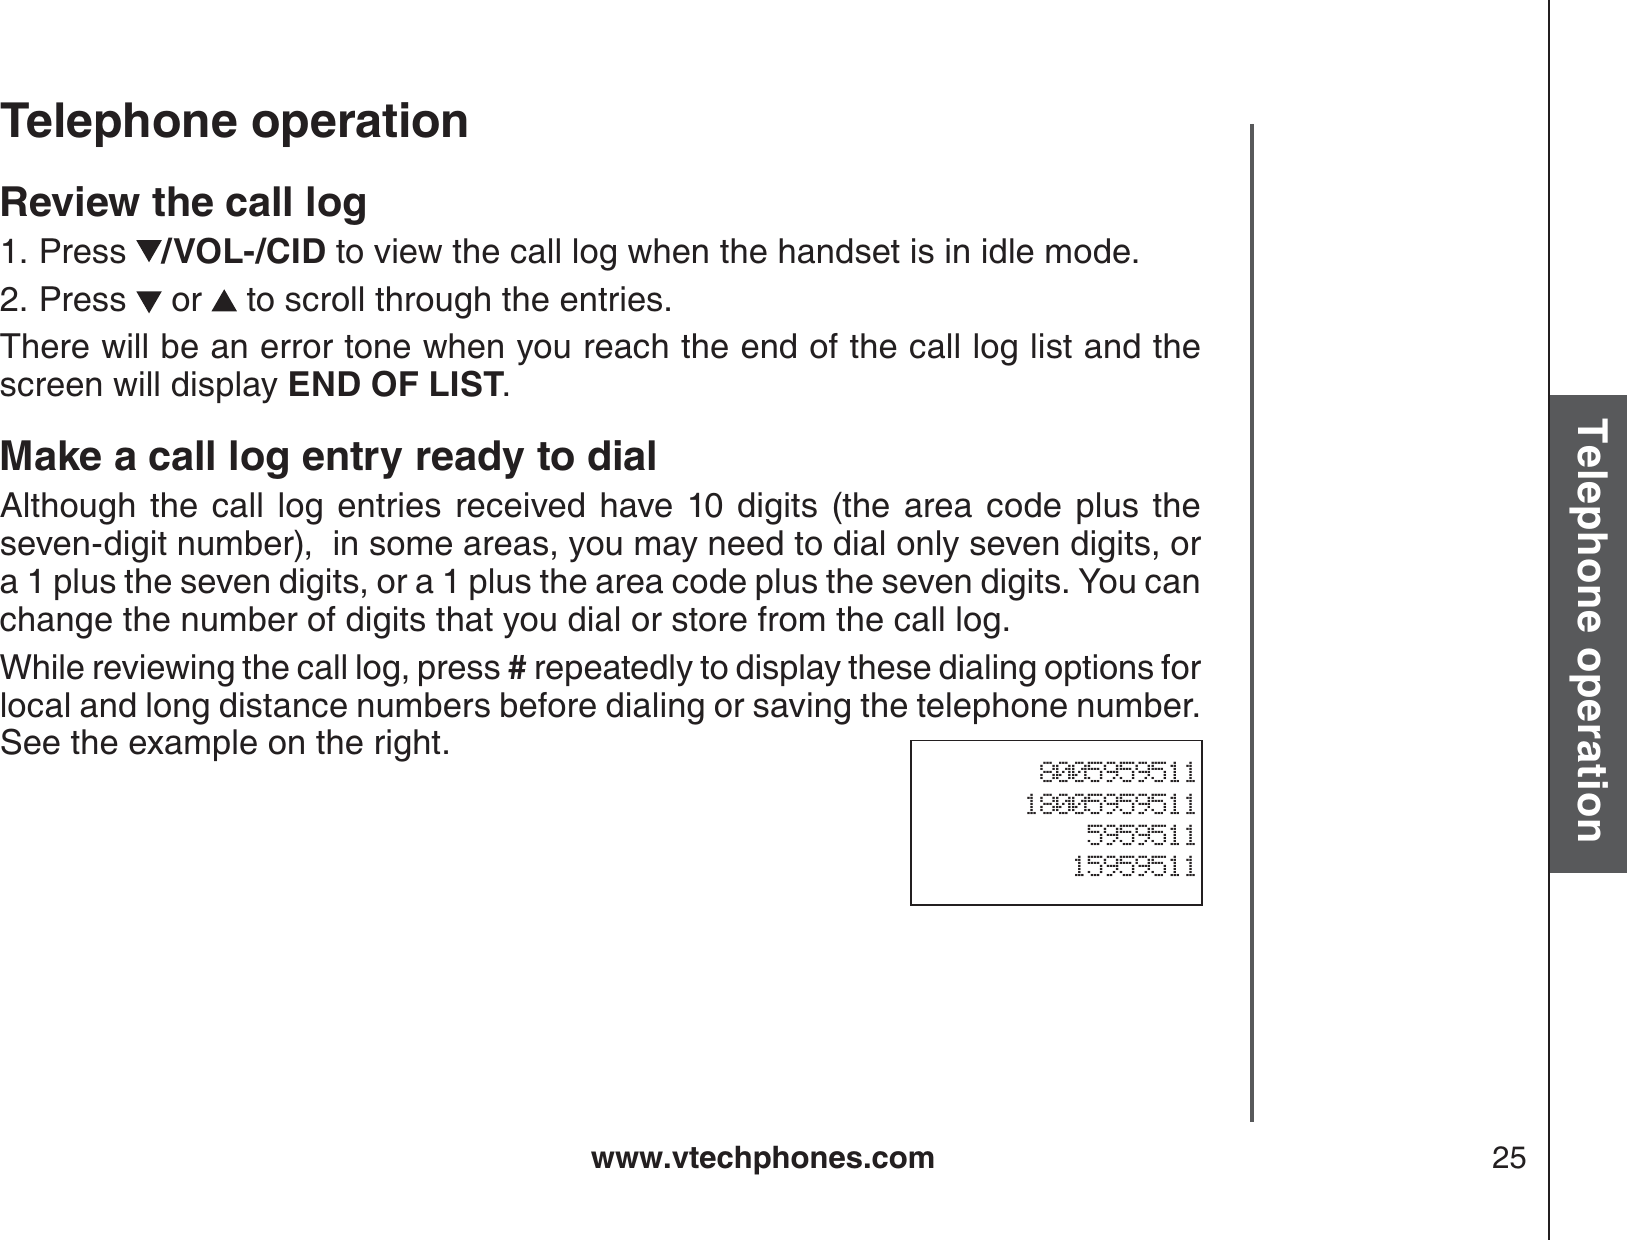 www.vtechphones.com 25Basic operationTelephone operationTelephone operationReview the call logPress  /VOL-/CID to view the call log when the handset is in idle mode. Press   or   to scroll through the entries.There will be an error tone when you reach the end of the call log list and the screen will display END OF LIST.Make a call log entry ready to dialAlthough the call log entries received have 10 digits (the area code plus the seven-digit number),  in some areas, you may need to dial only seven digits, or a 1 plus the seven digits, or a 1 plus the area code plus the seven digits. You can change the number of digits that you dial or store from the call log.   While reviewing the call log, press # repeatedly to display these dialing options for local and long distance numbers before dialing or saving the telephone number.  See the example on the right.1.2.800595951118005959511595951115959511